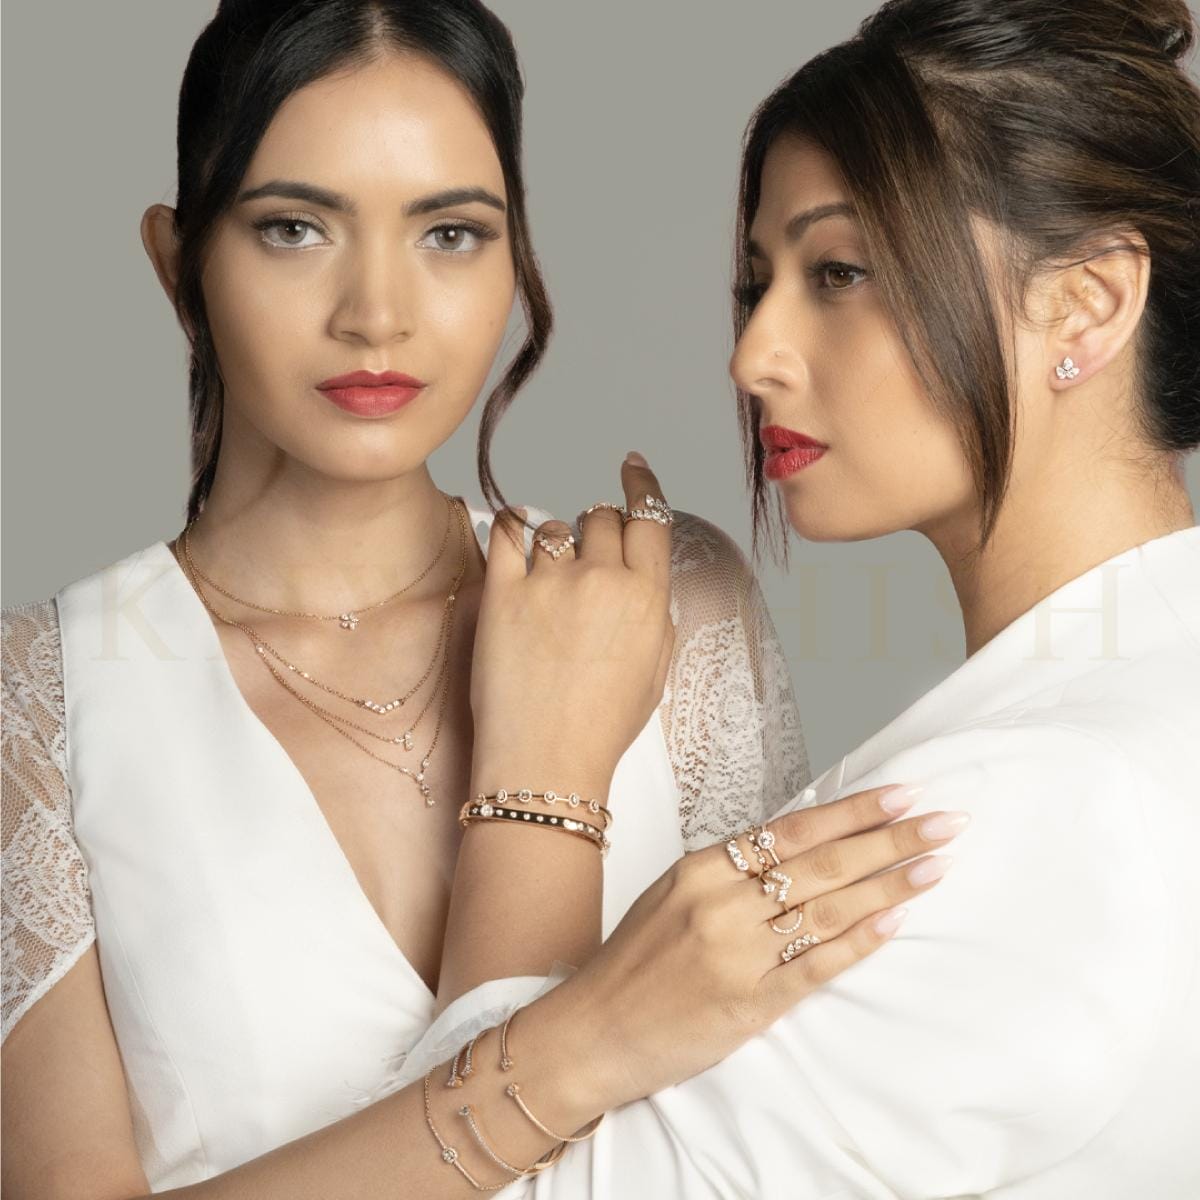 Trendy and modern women are showcasing their diamond jewellery from the Glitz collection of Khwaahish.